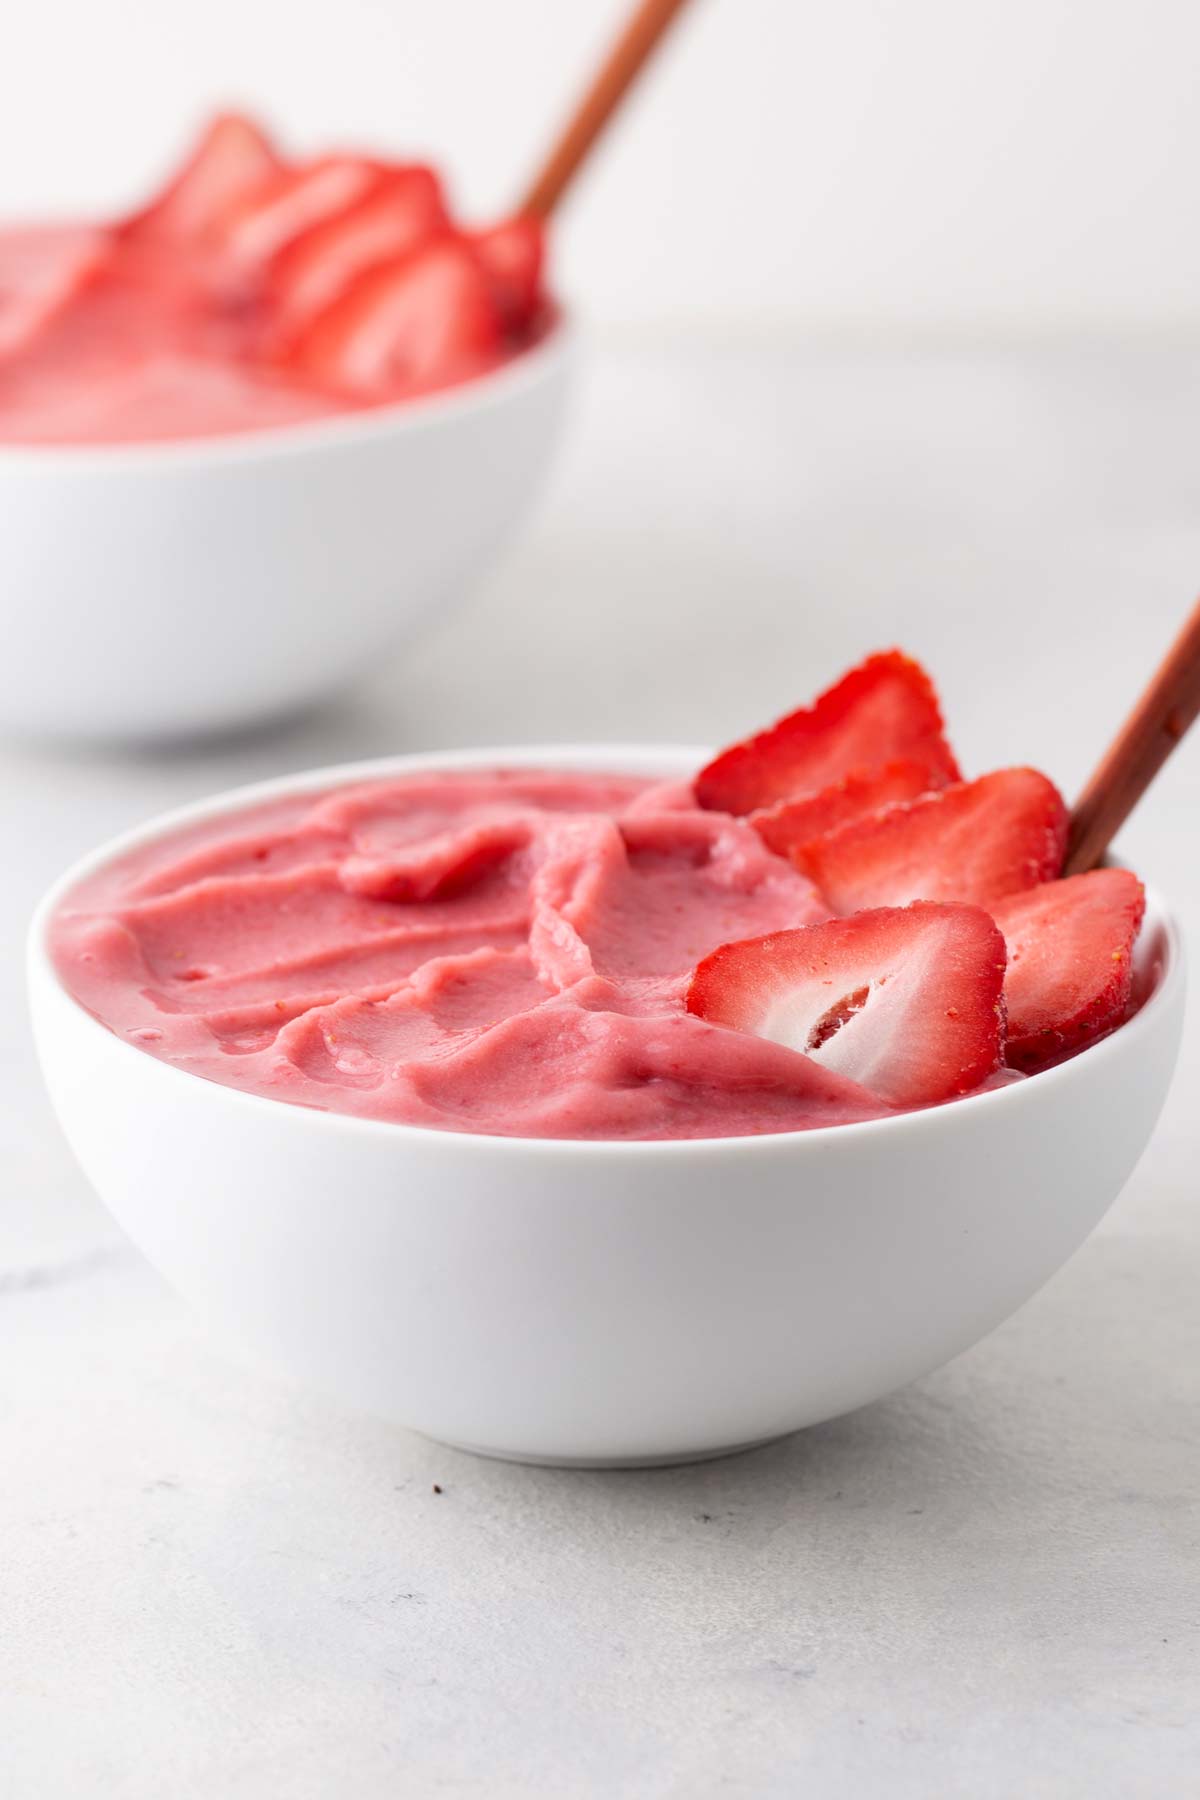 Strawberry smoothie bowl on a table.